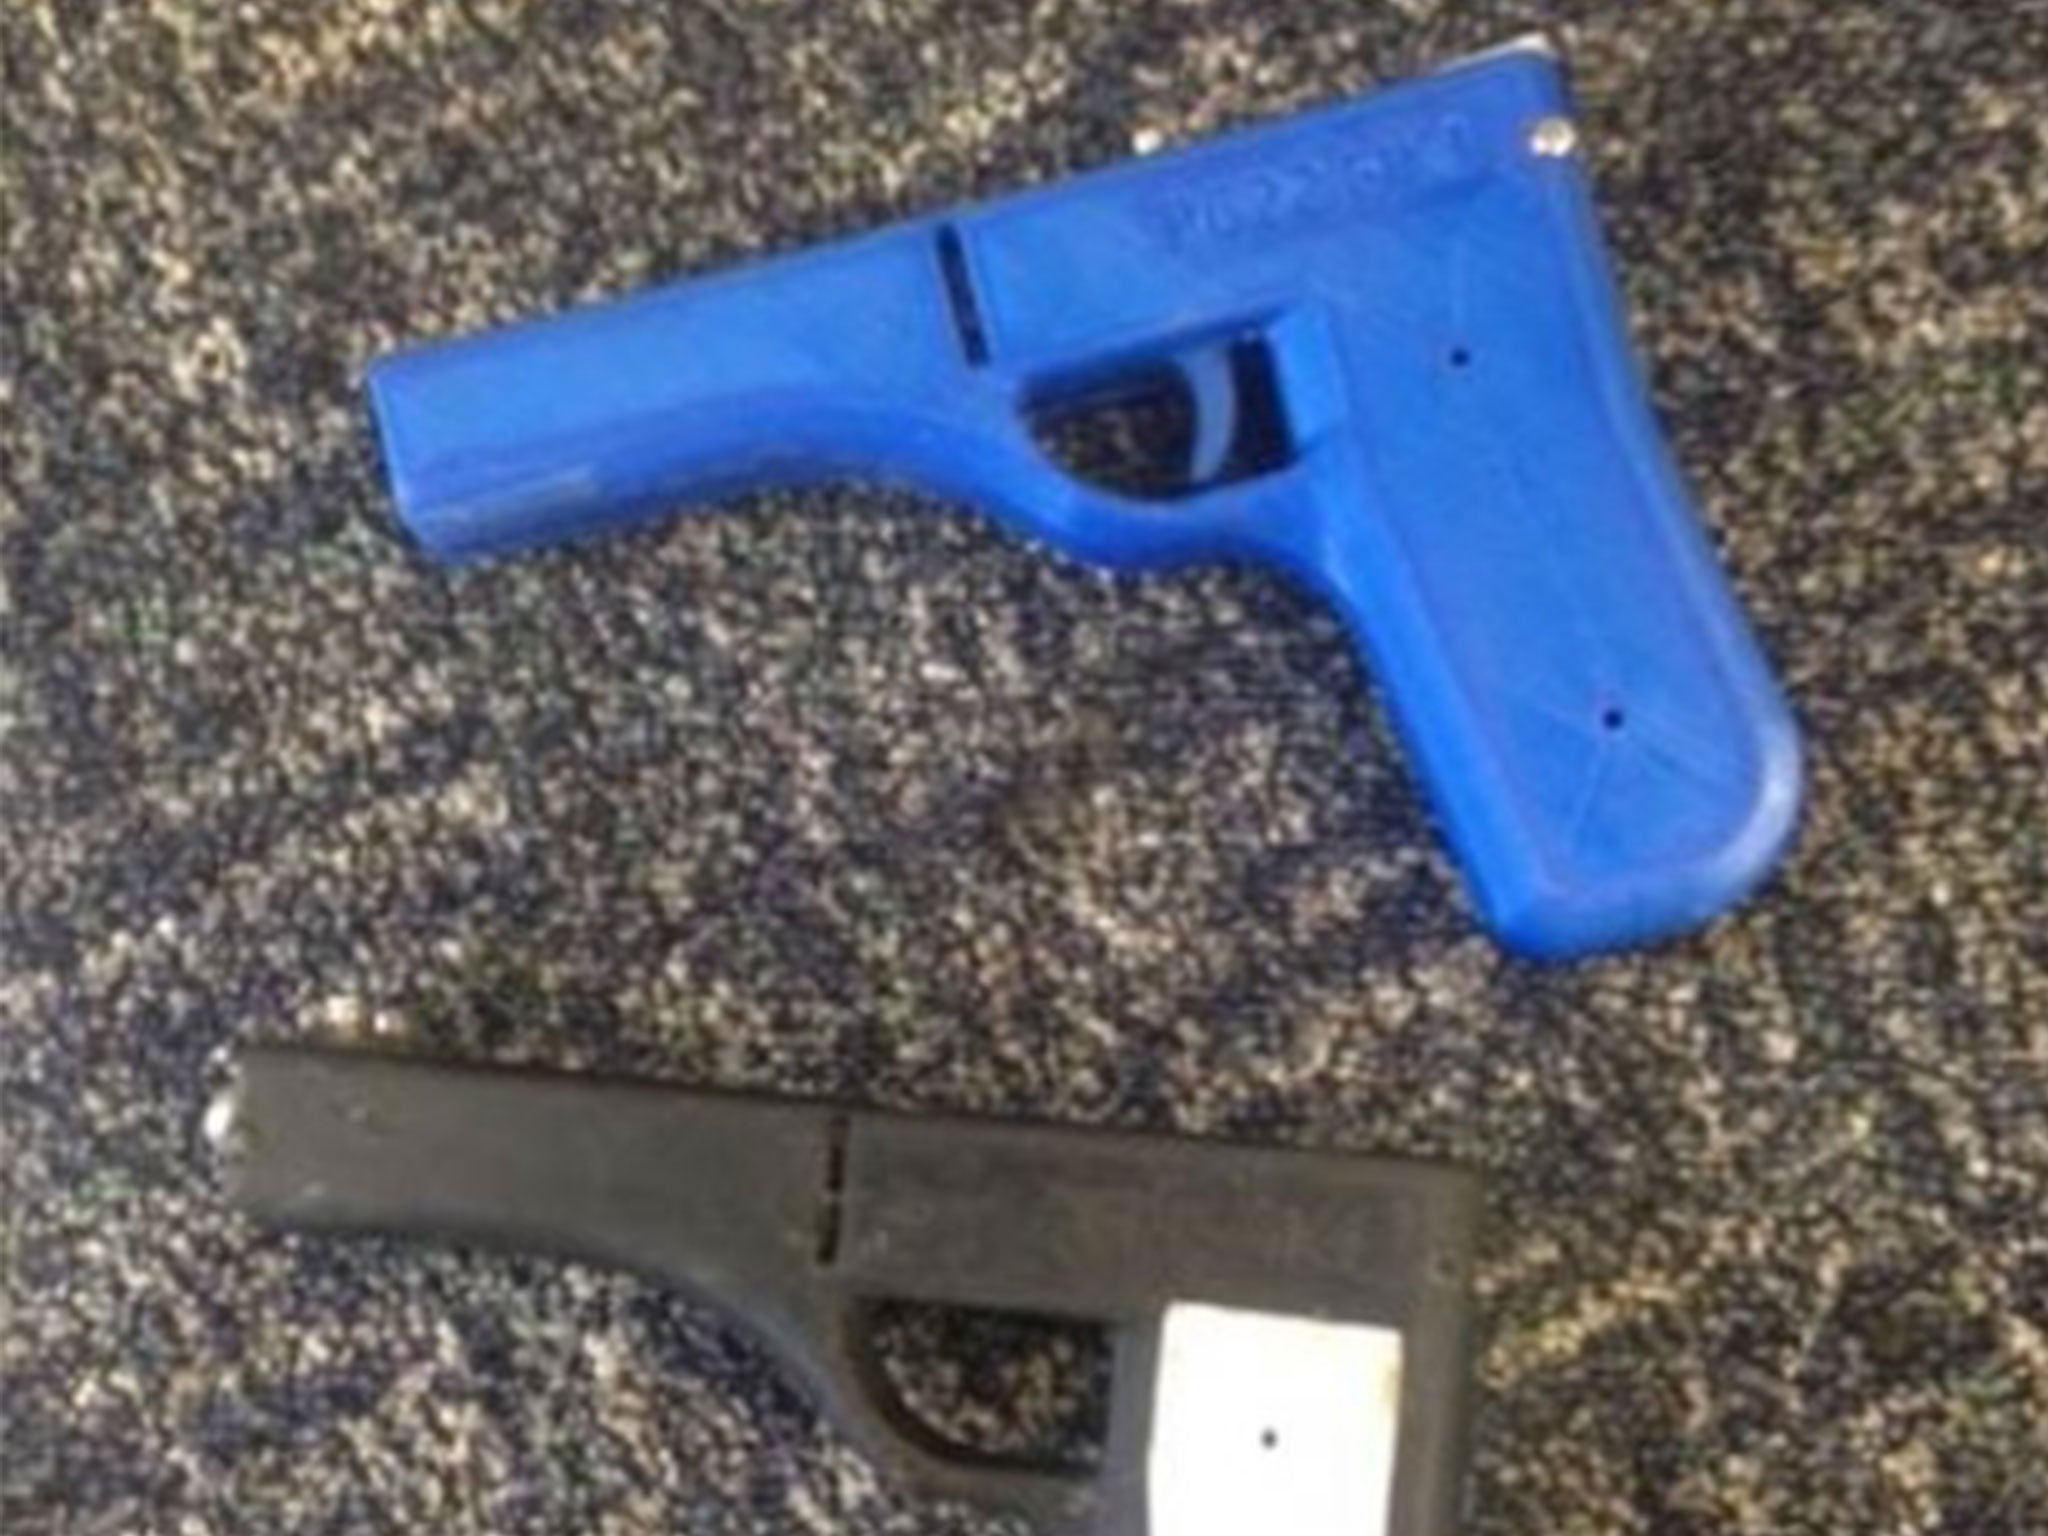 Police recovered various firearm designs that appeared to have been produced using a 3D printer